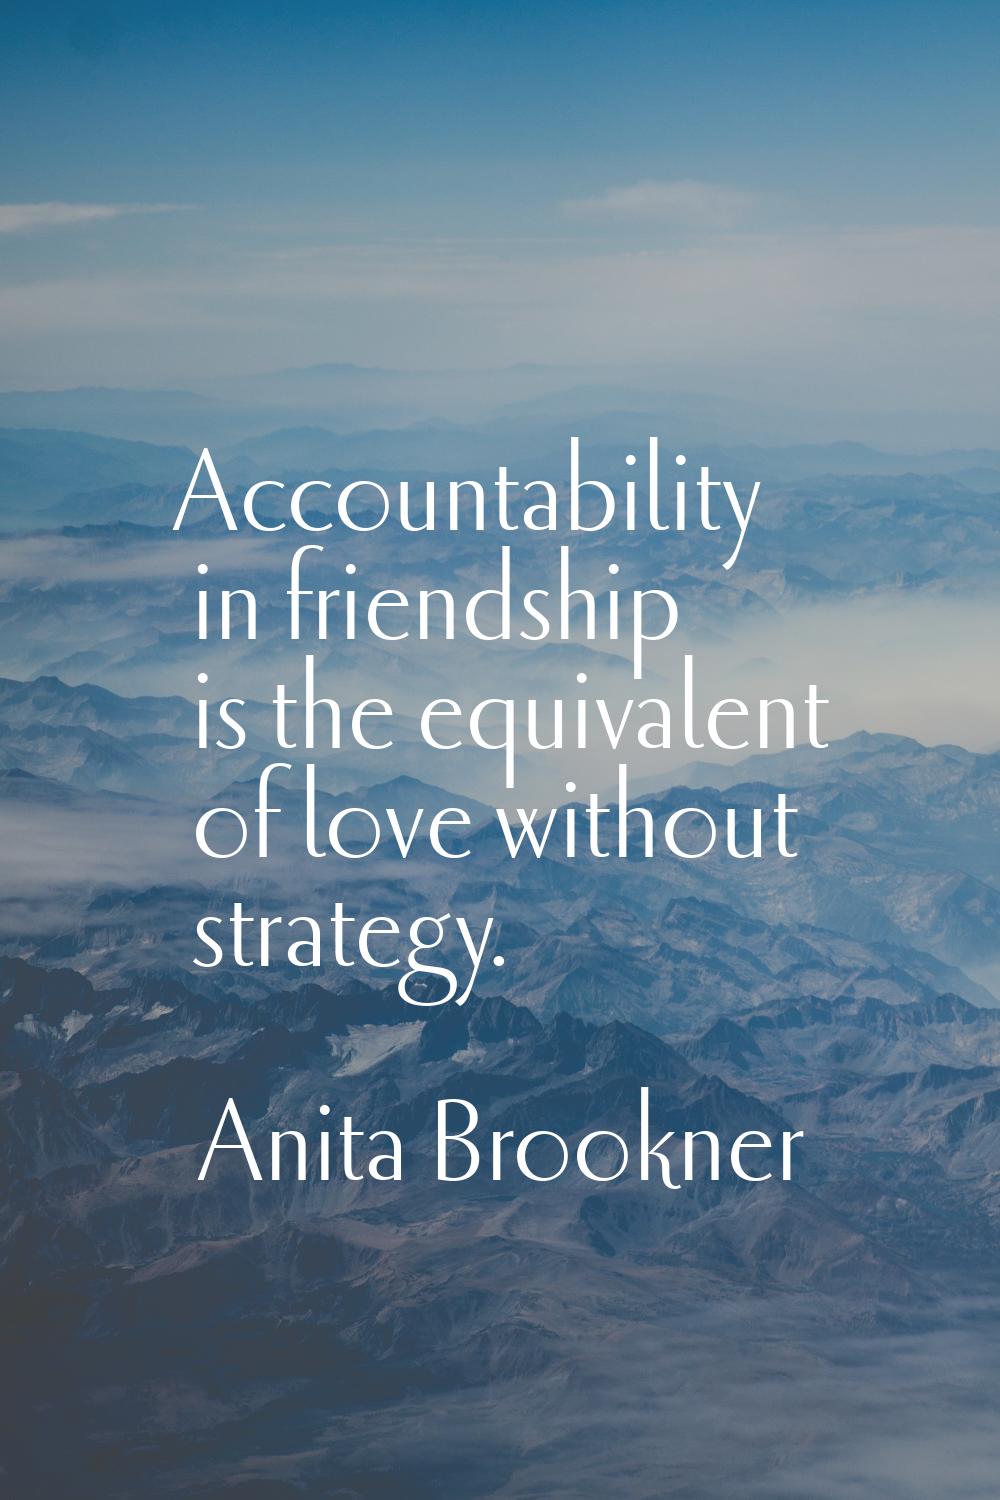 Accountability in friendship is the equivalent of love without strategy.